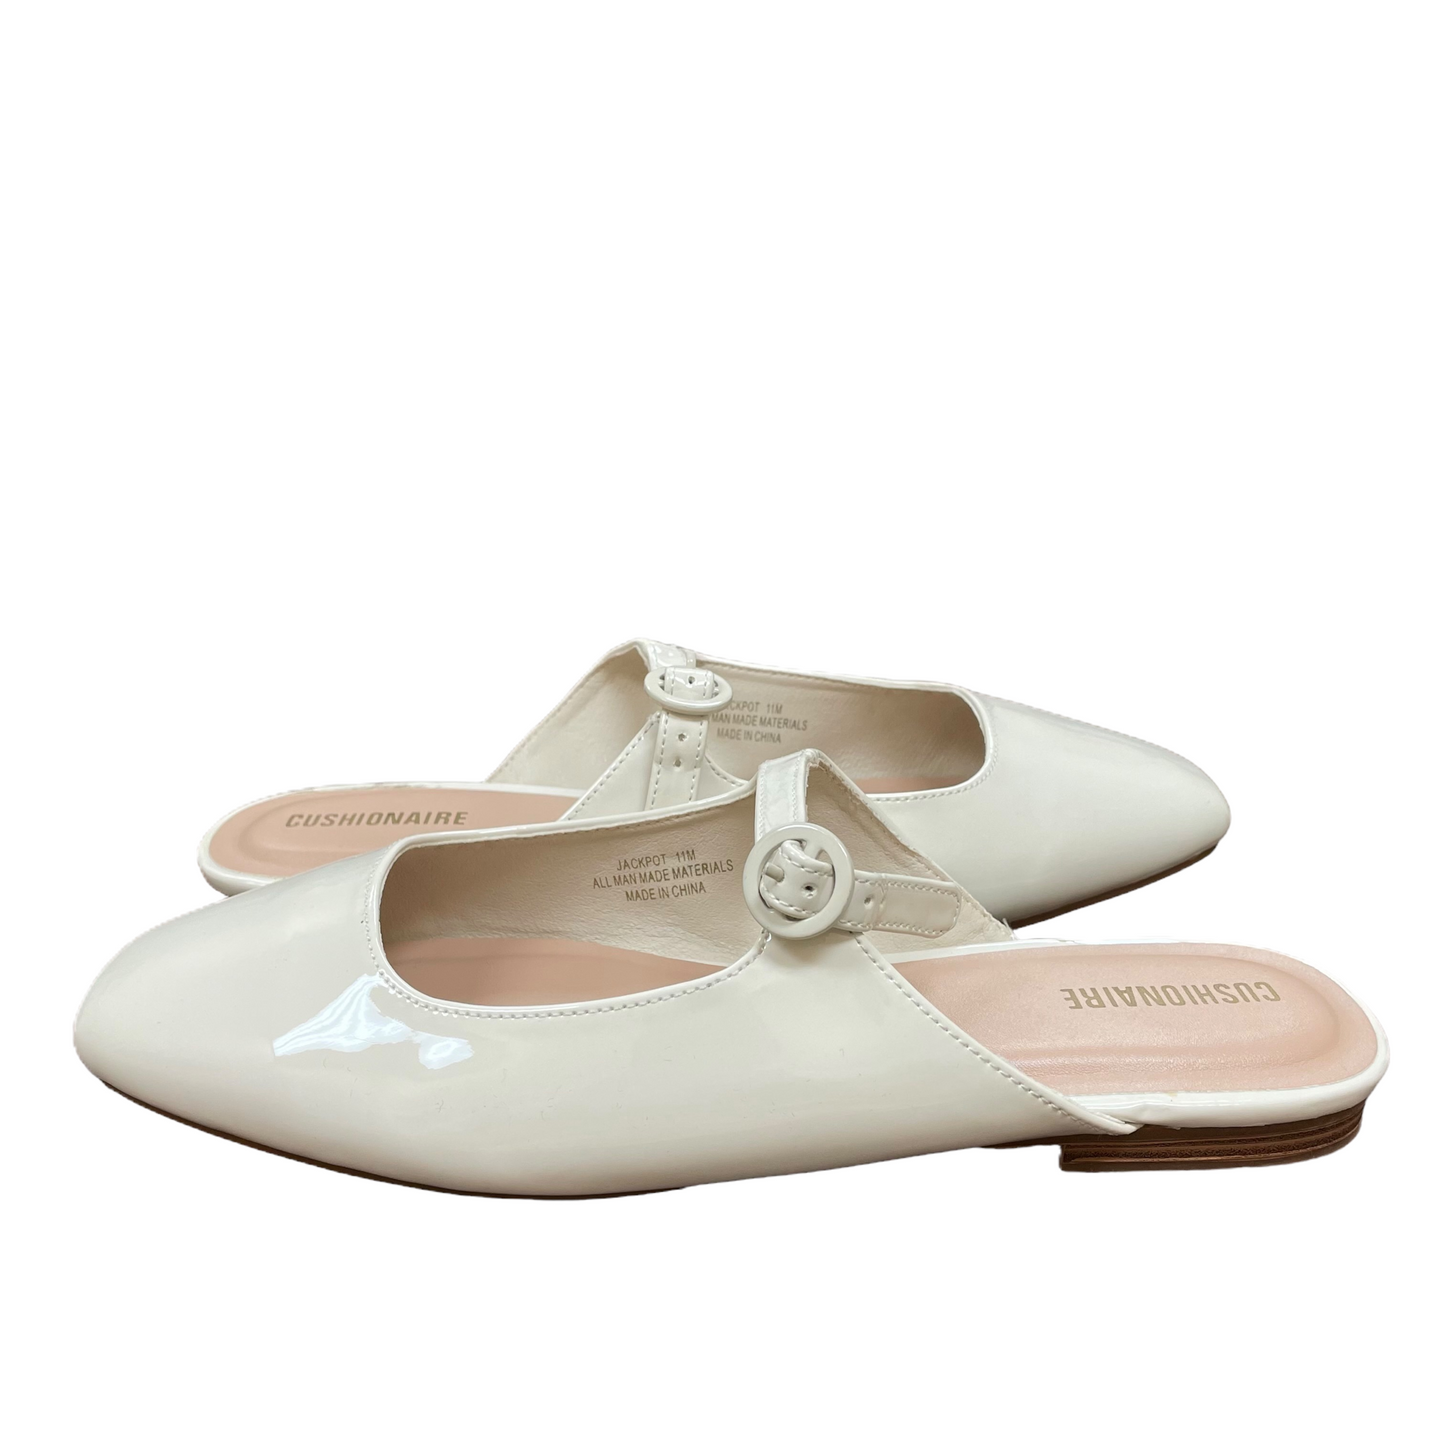 White Shoes Flats By Cushionaire, Size: 11